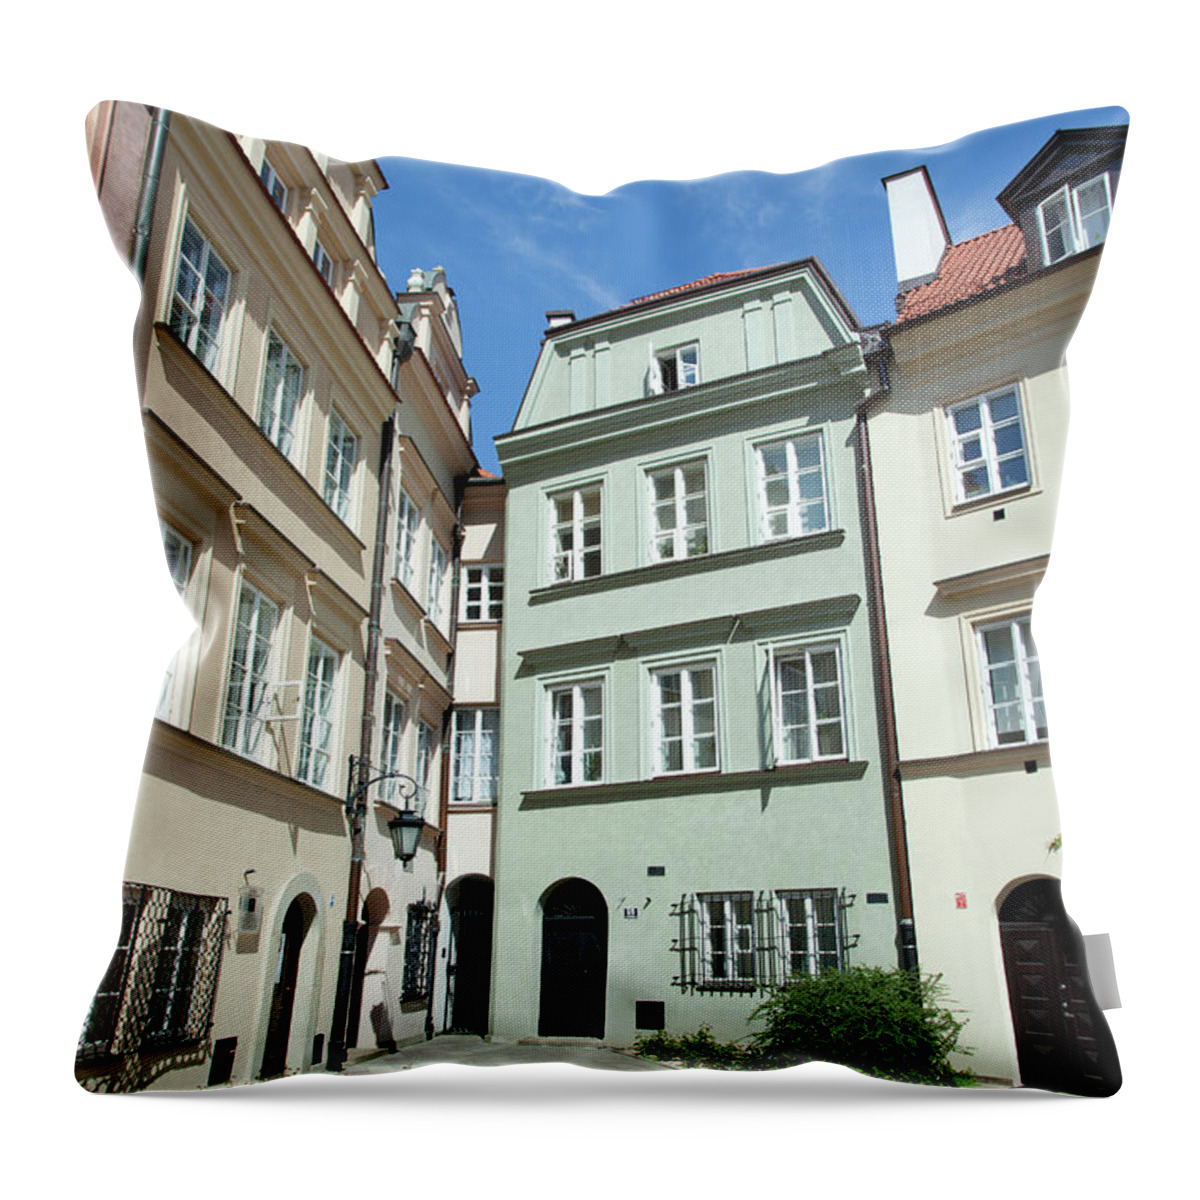 House Throw Pillow featuring the photograph The Narrowest House by Ramunas Bruzas